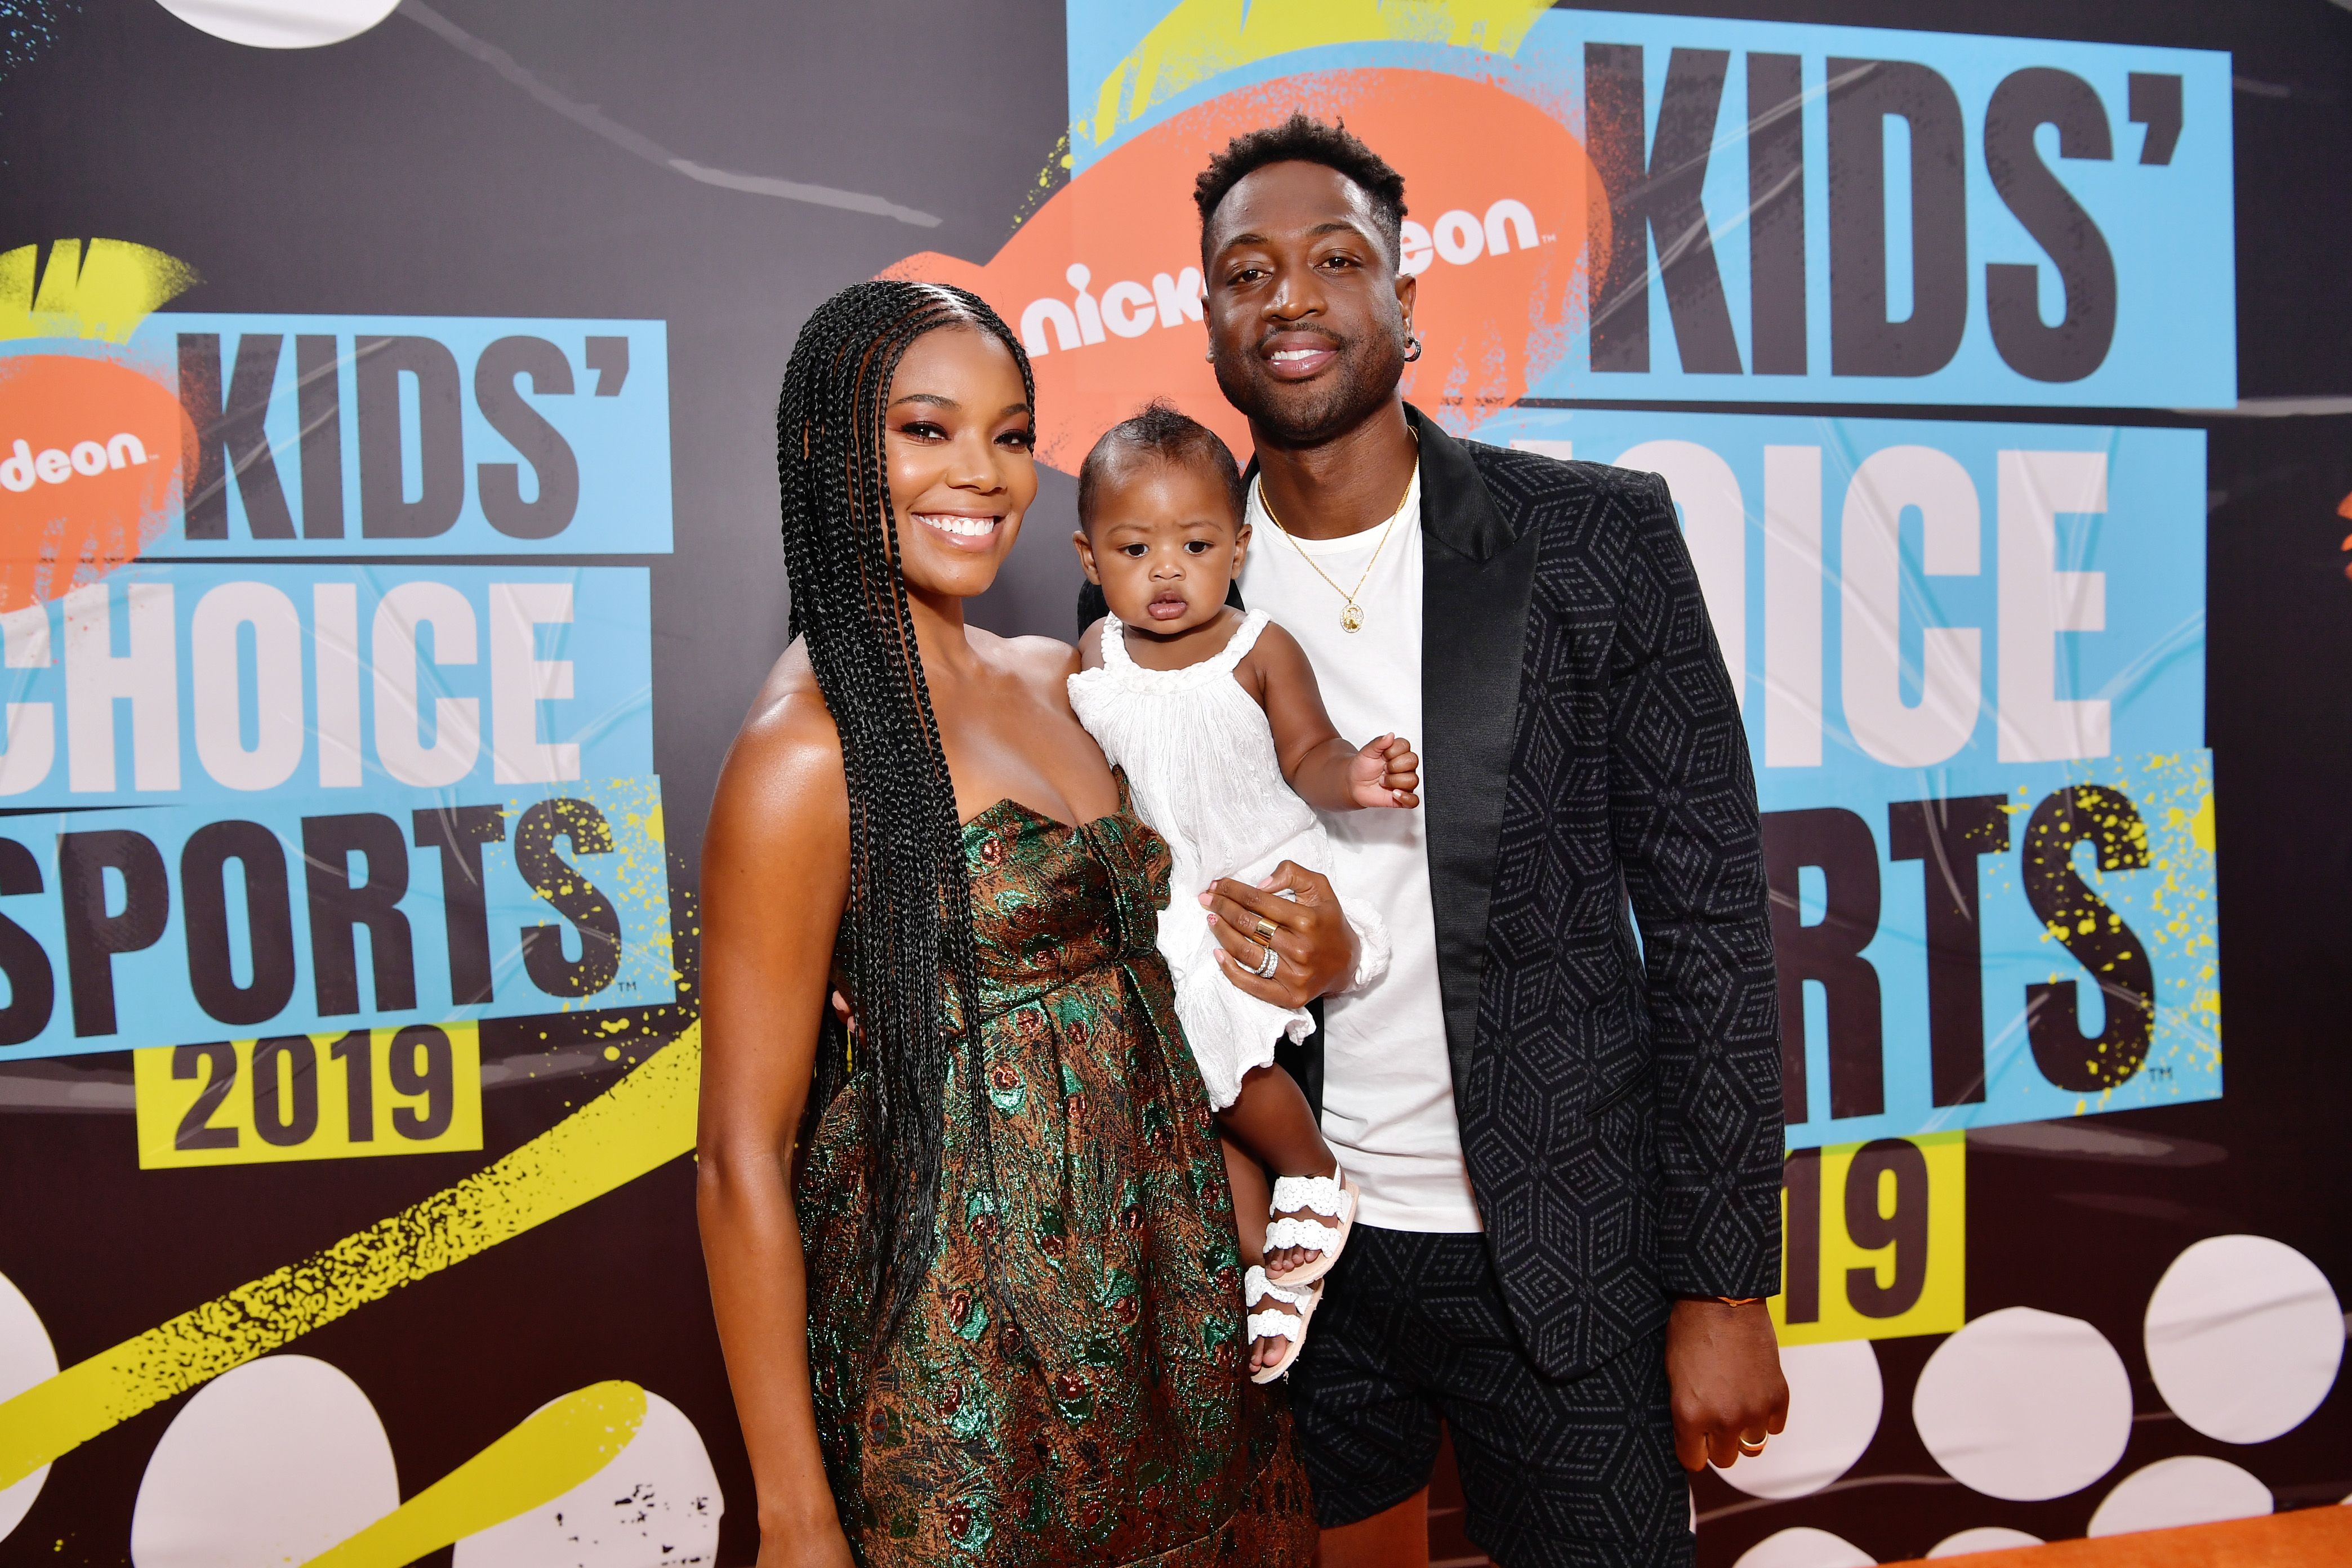 Gabrielle Union and Dwyane Wade at Nickelodeon Kids' Choice Sports 2019 at Barker Hangar on July 11, 2019 in Santa Monica, California. | Photo: Getty Images